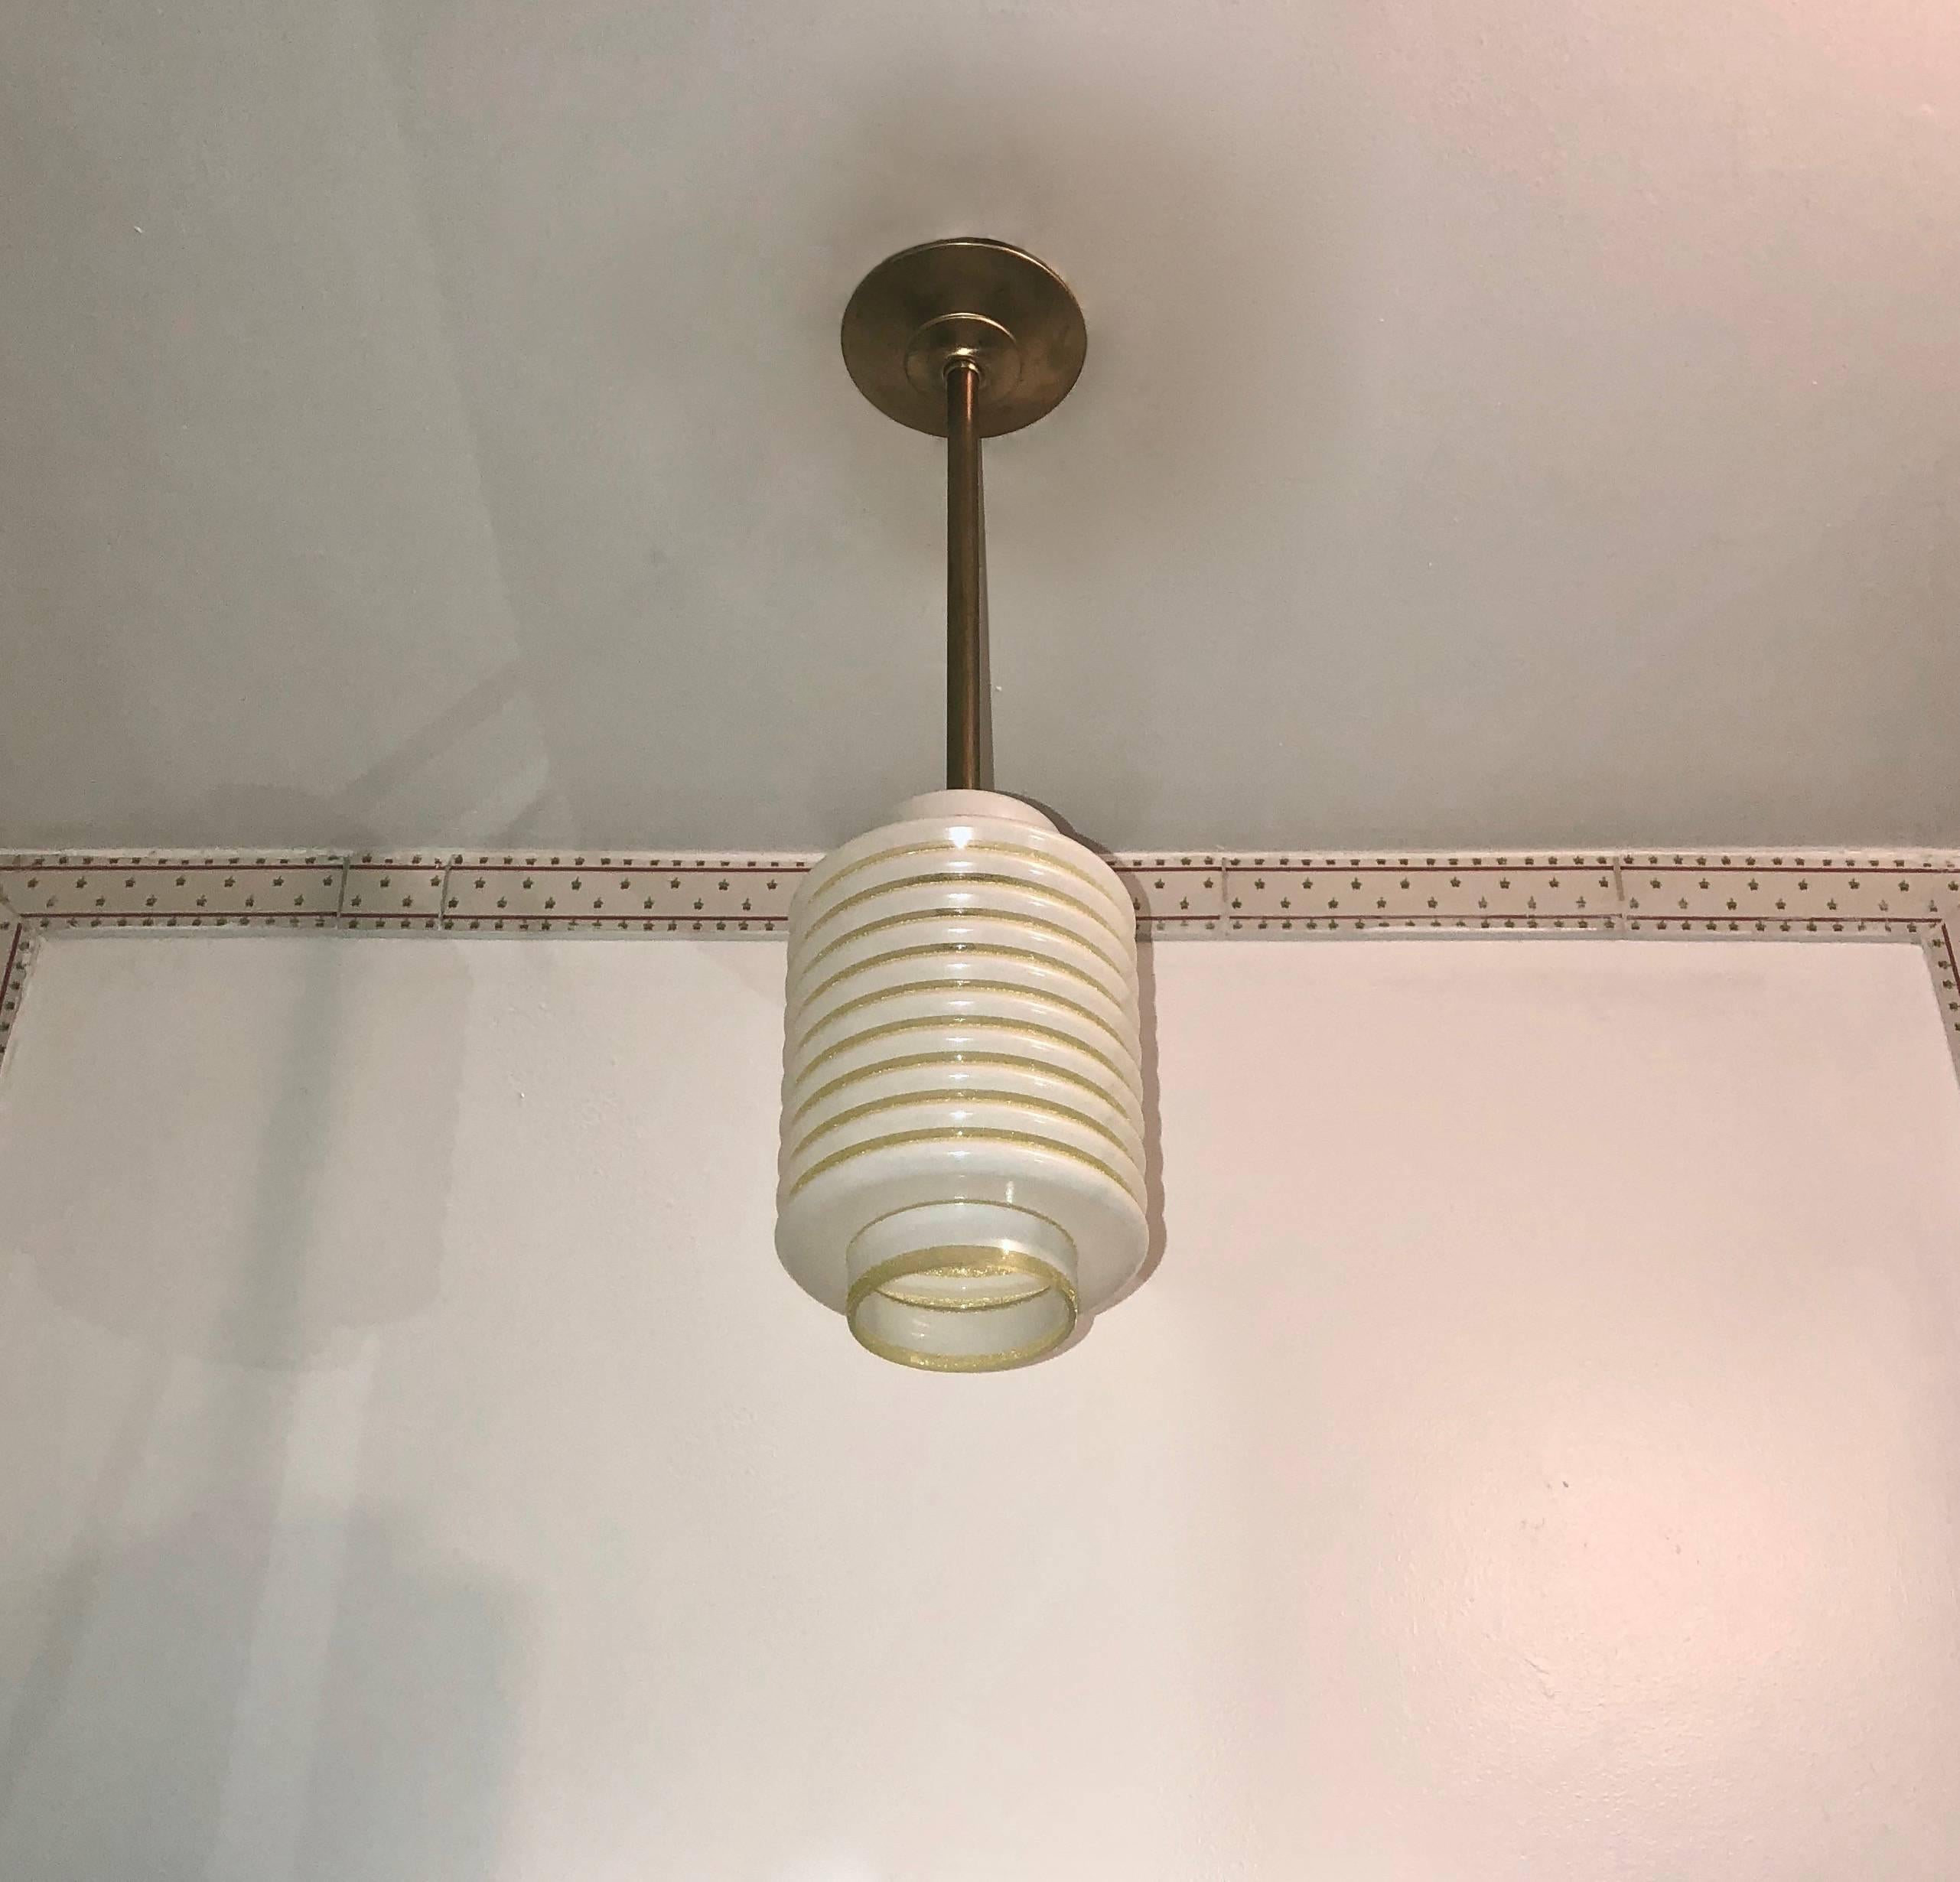 Five French ceiling lights in large-ribbed glass with decorative yellow bands . Each light hangs from a brass stem and canopy. Each fixture has been rewired to a single American candelabra socket.
Original label 